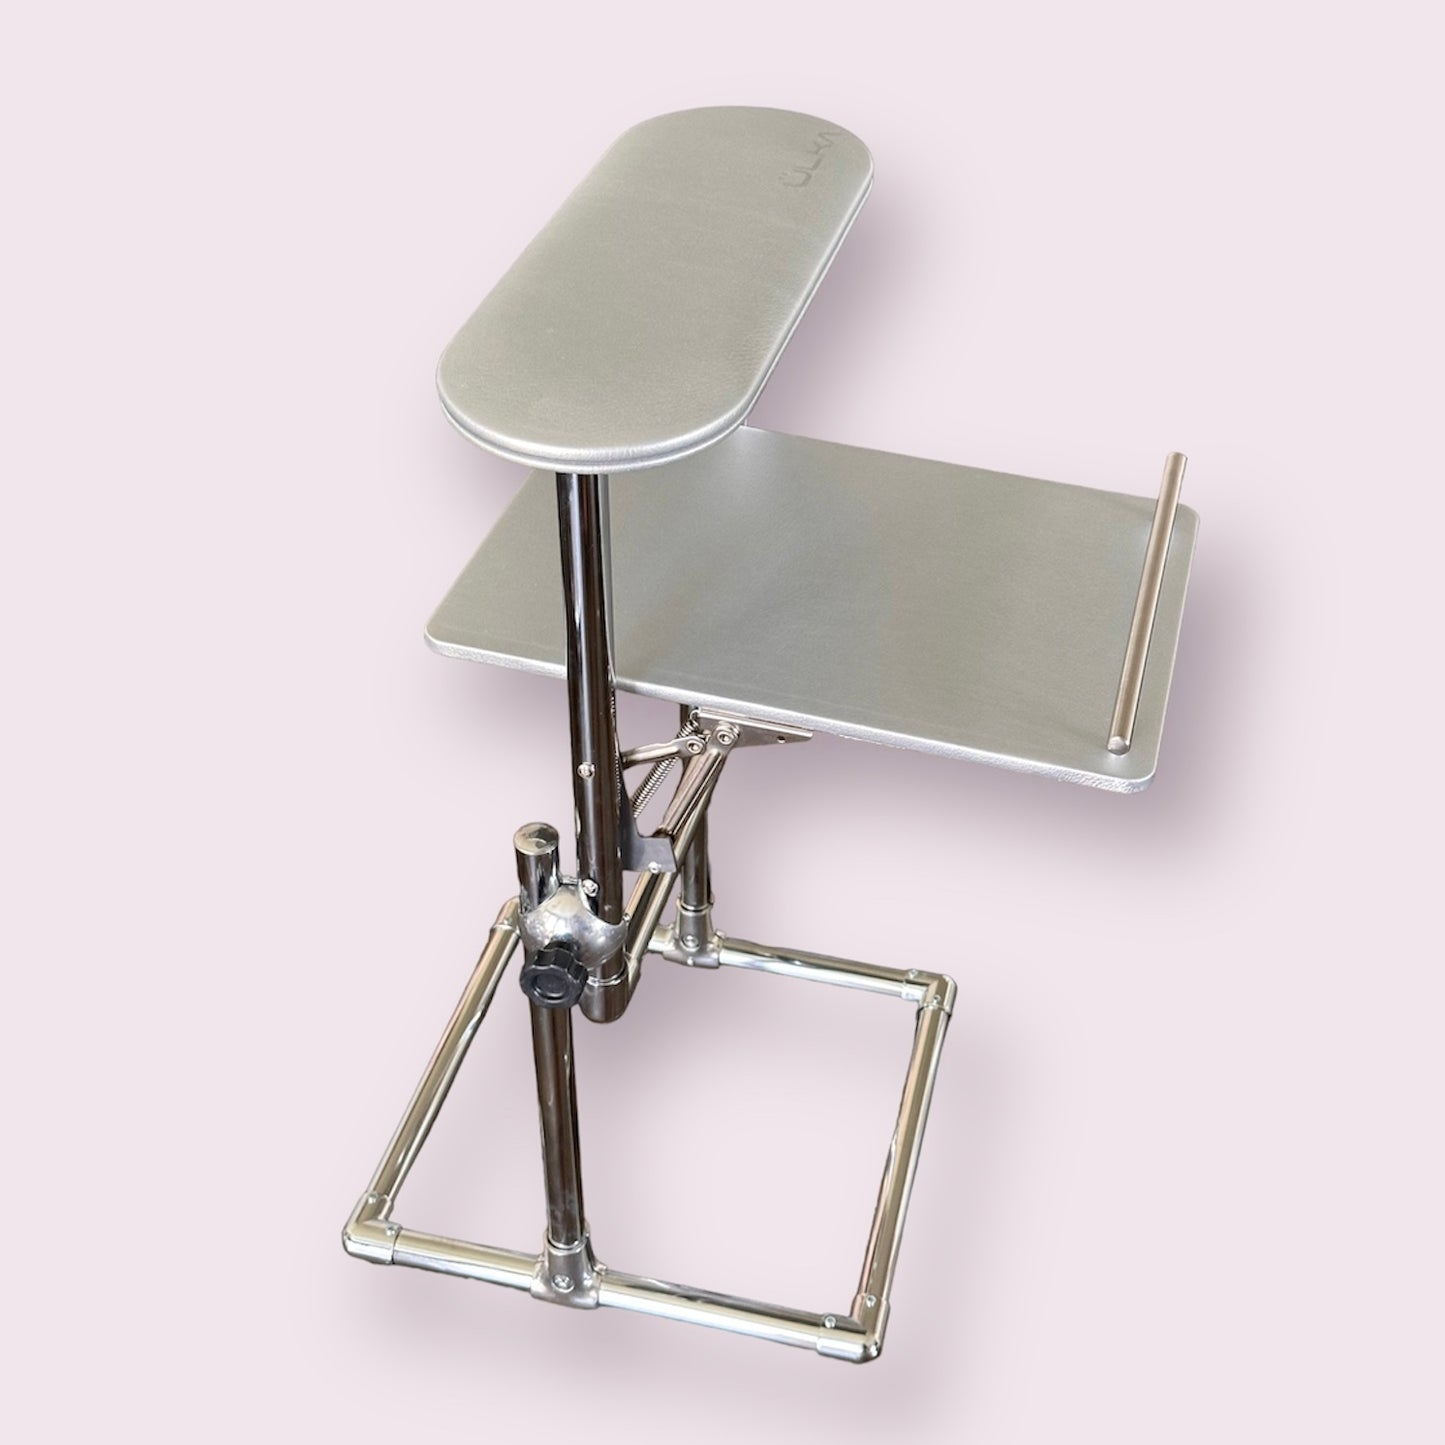 ULKA BALANCE Pedicure Stand for Nail Dust Vacuum Collector and tools